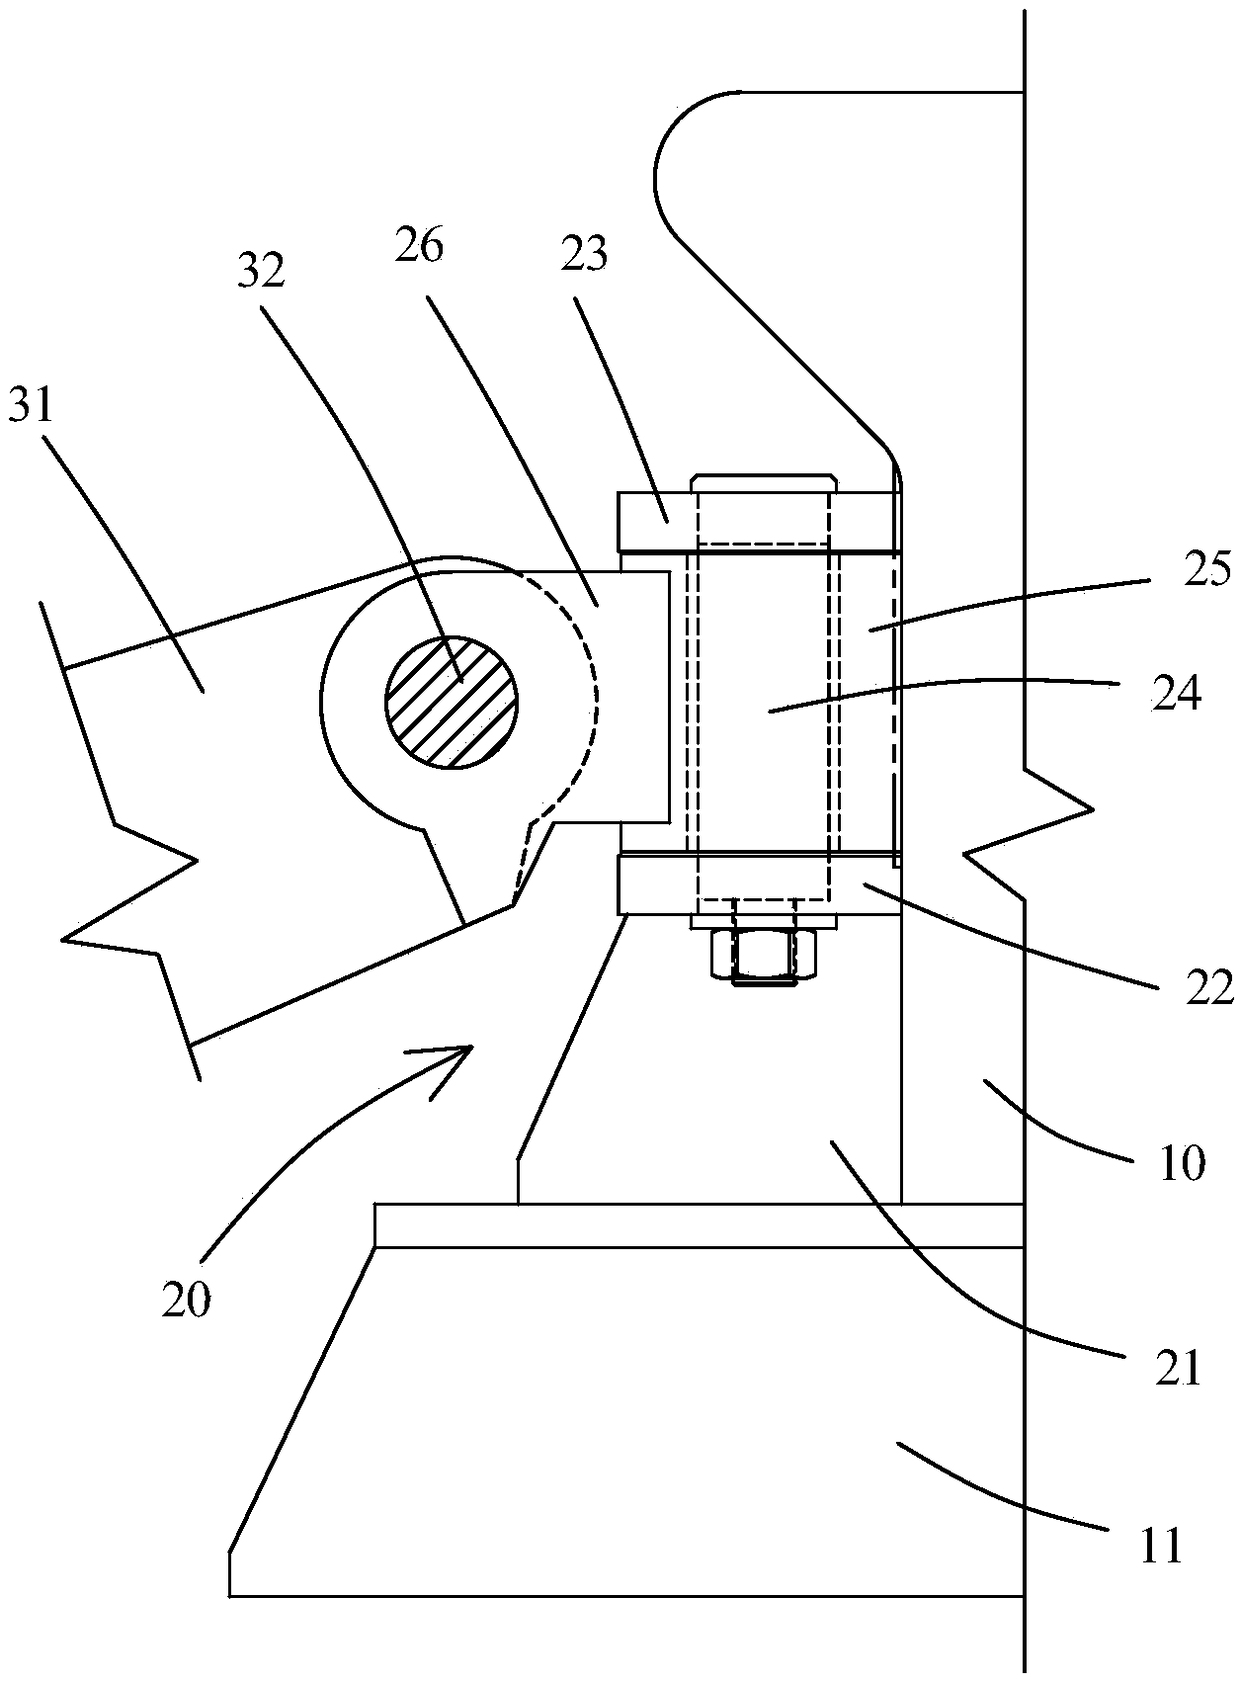 Mooring winch with emergency quick cable release device